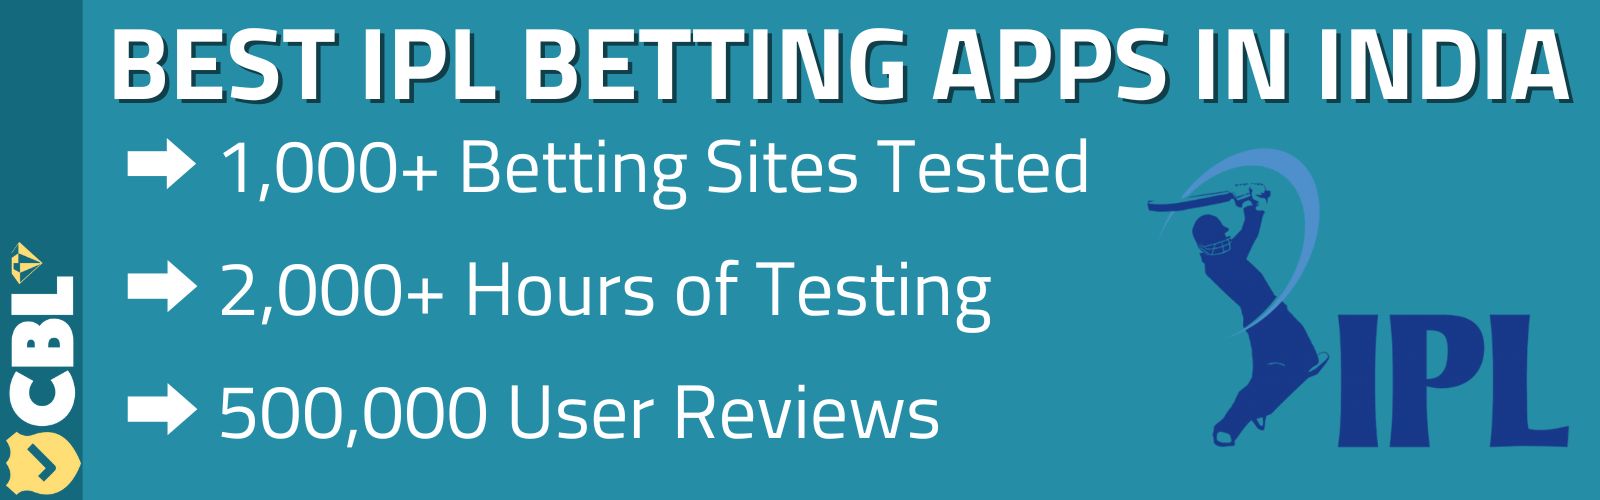 How To Make Your Top 10 Cricket Betting Apps In India Look Amazing In 5 Days